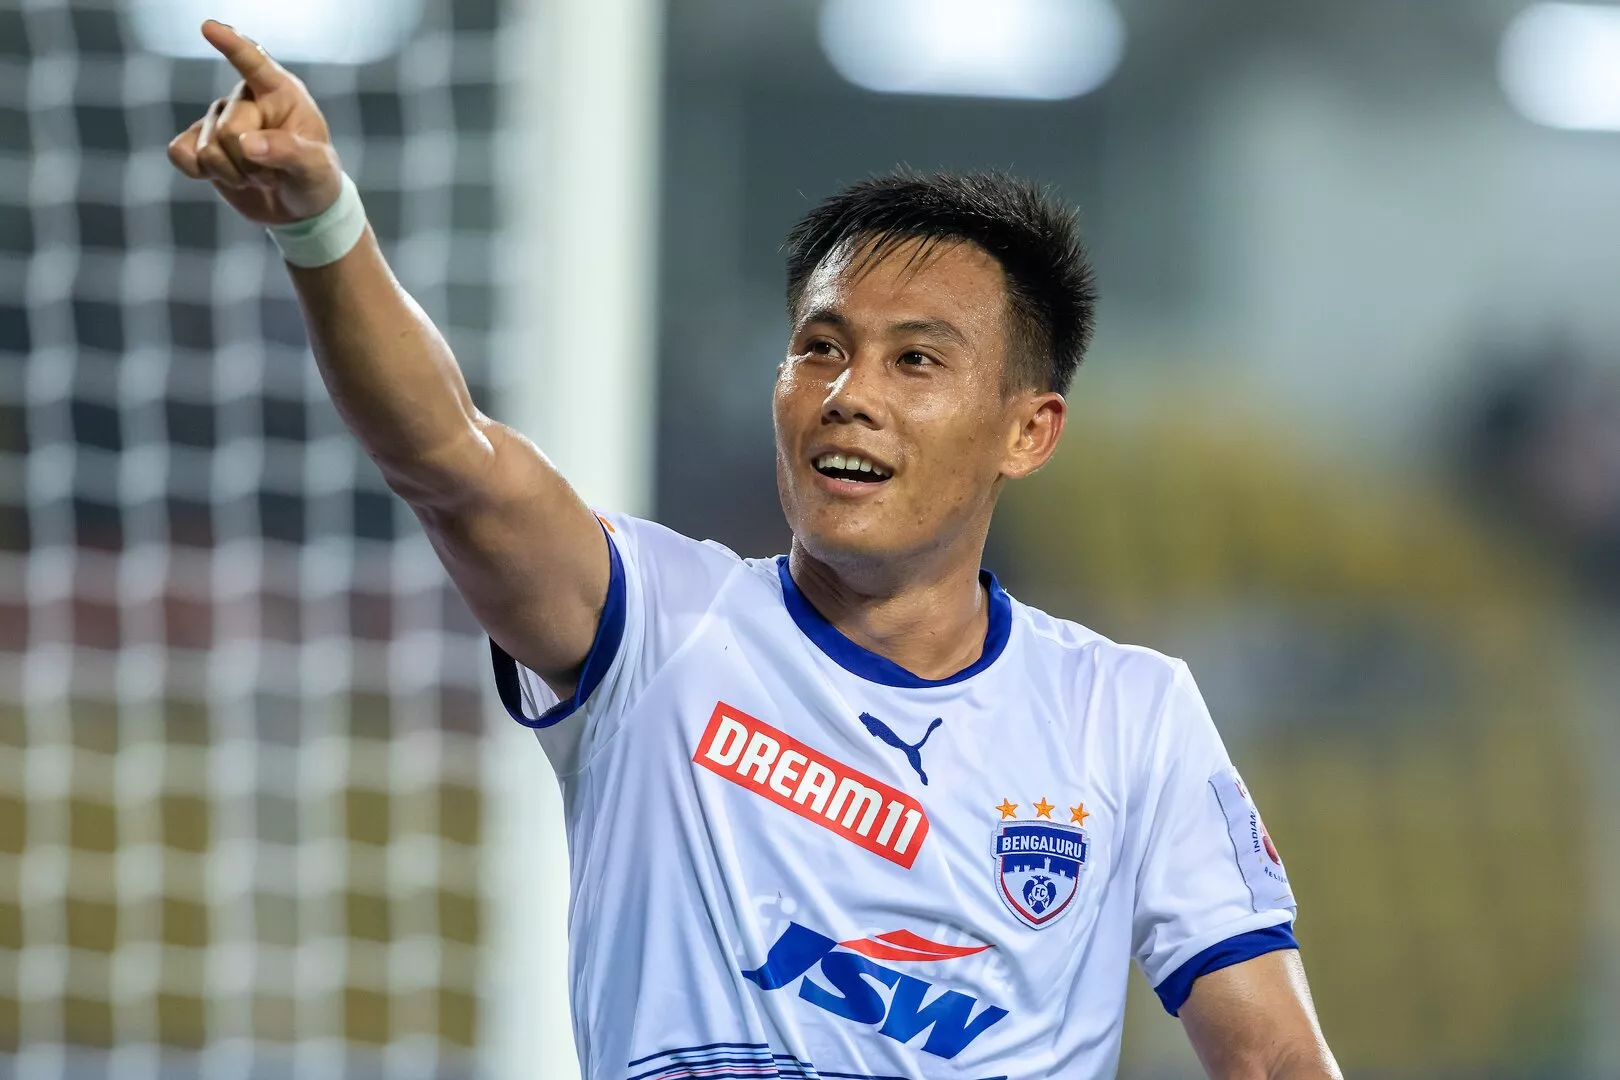 When I joined BFC, Sunil Chhetri was the first person to meet me, reminisces Udanta Singh